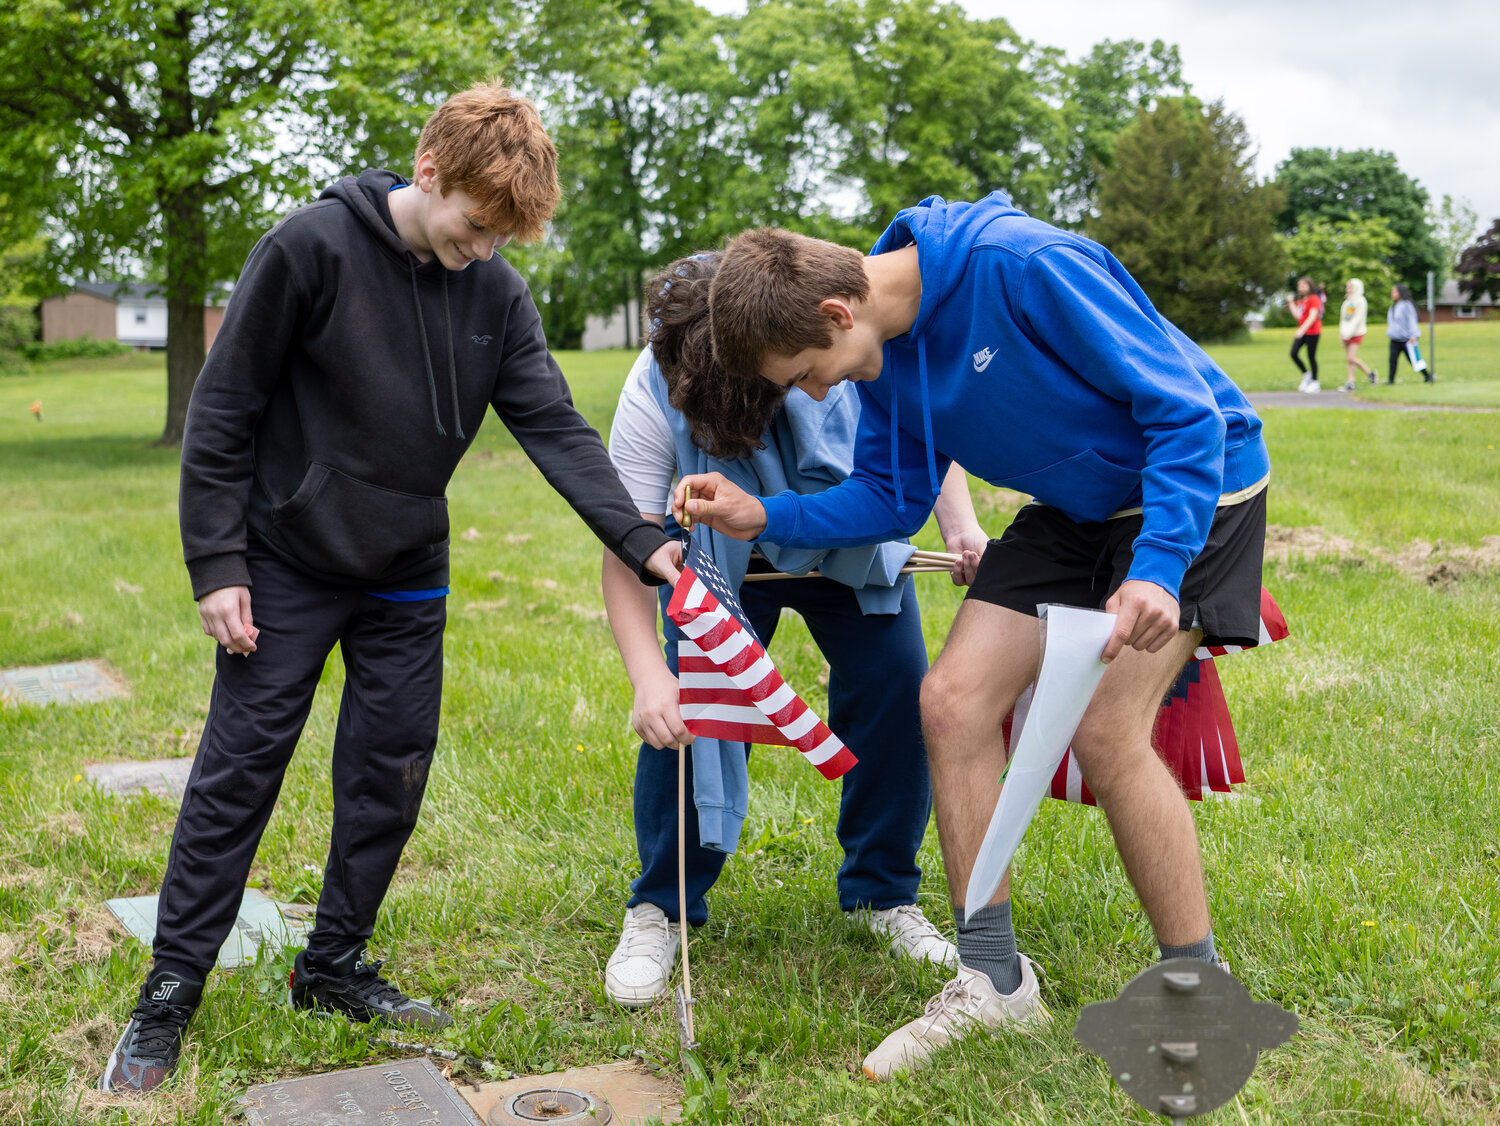 Students Mason Forrester, Lachlan Bradley and Boston Gower spent May 16 preparing veterans’ graves for Memorial Day in Perkasie.